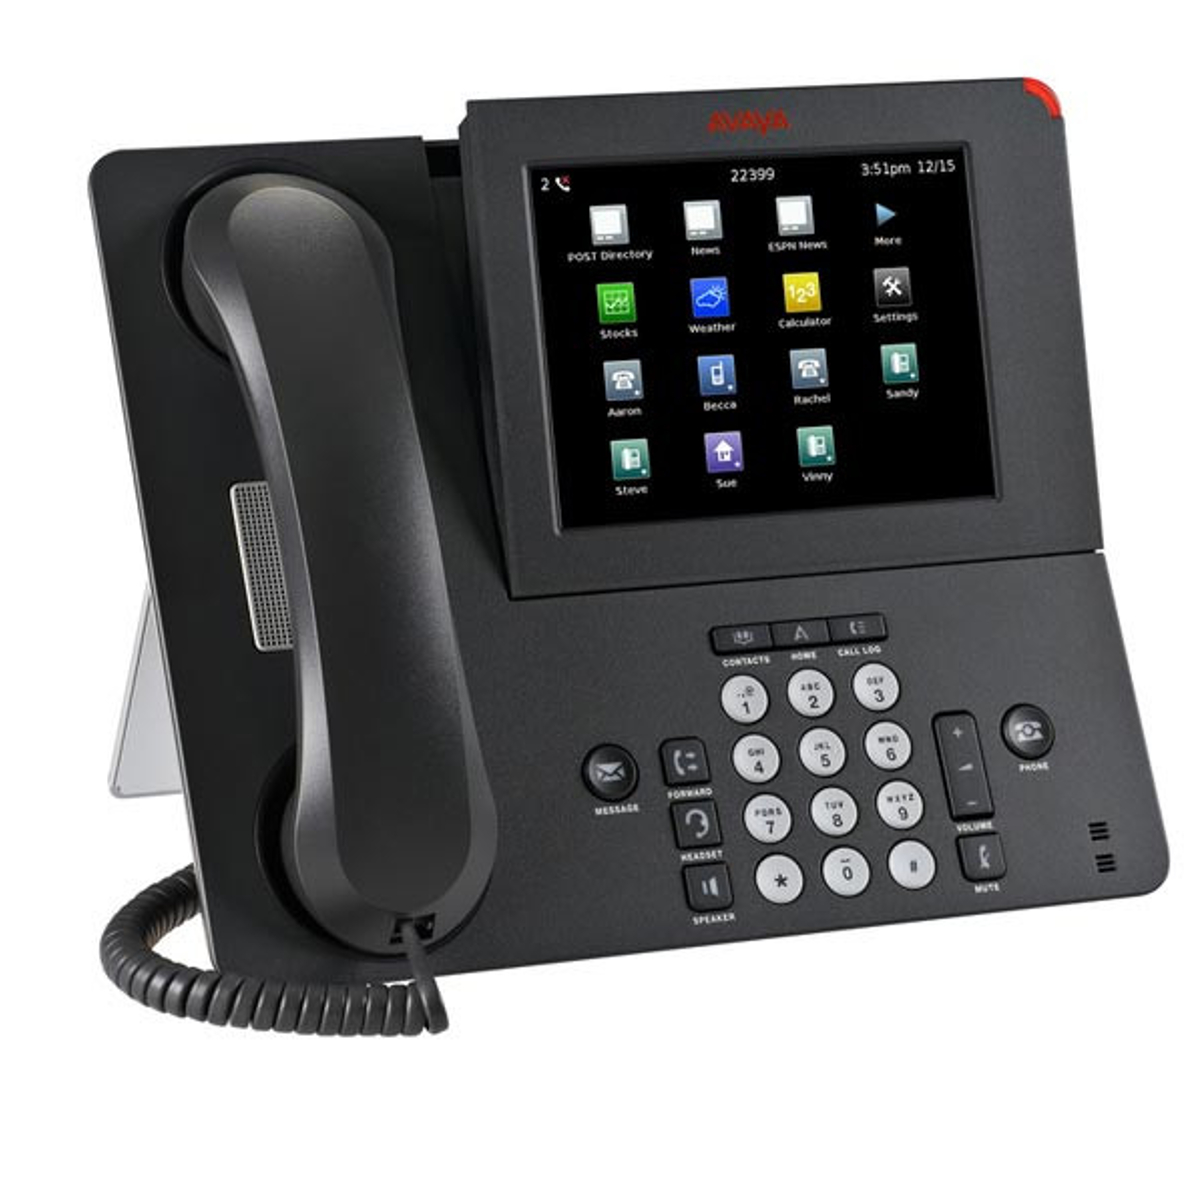 Avaya 9670G IP Phone with Color Touchscreen - 700460215